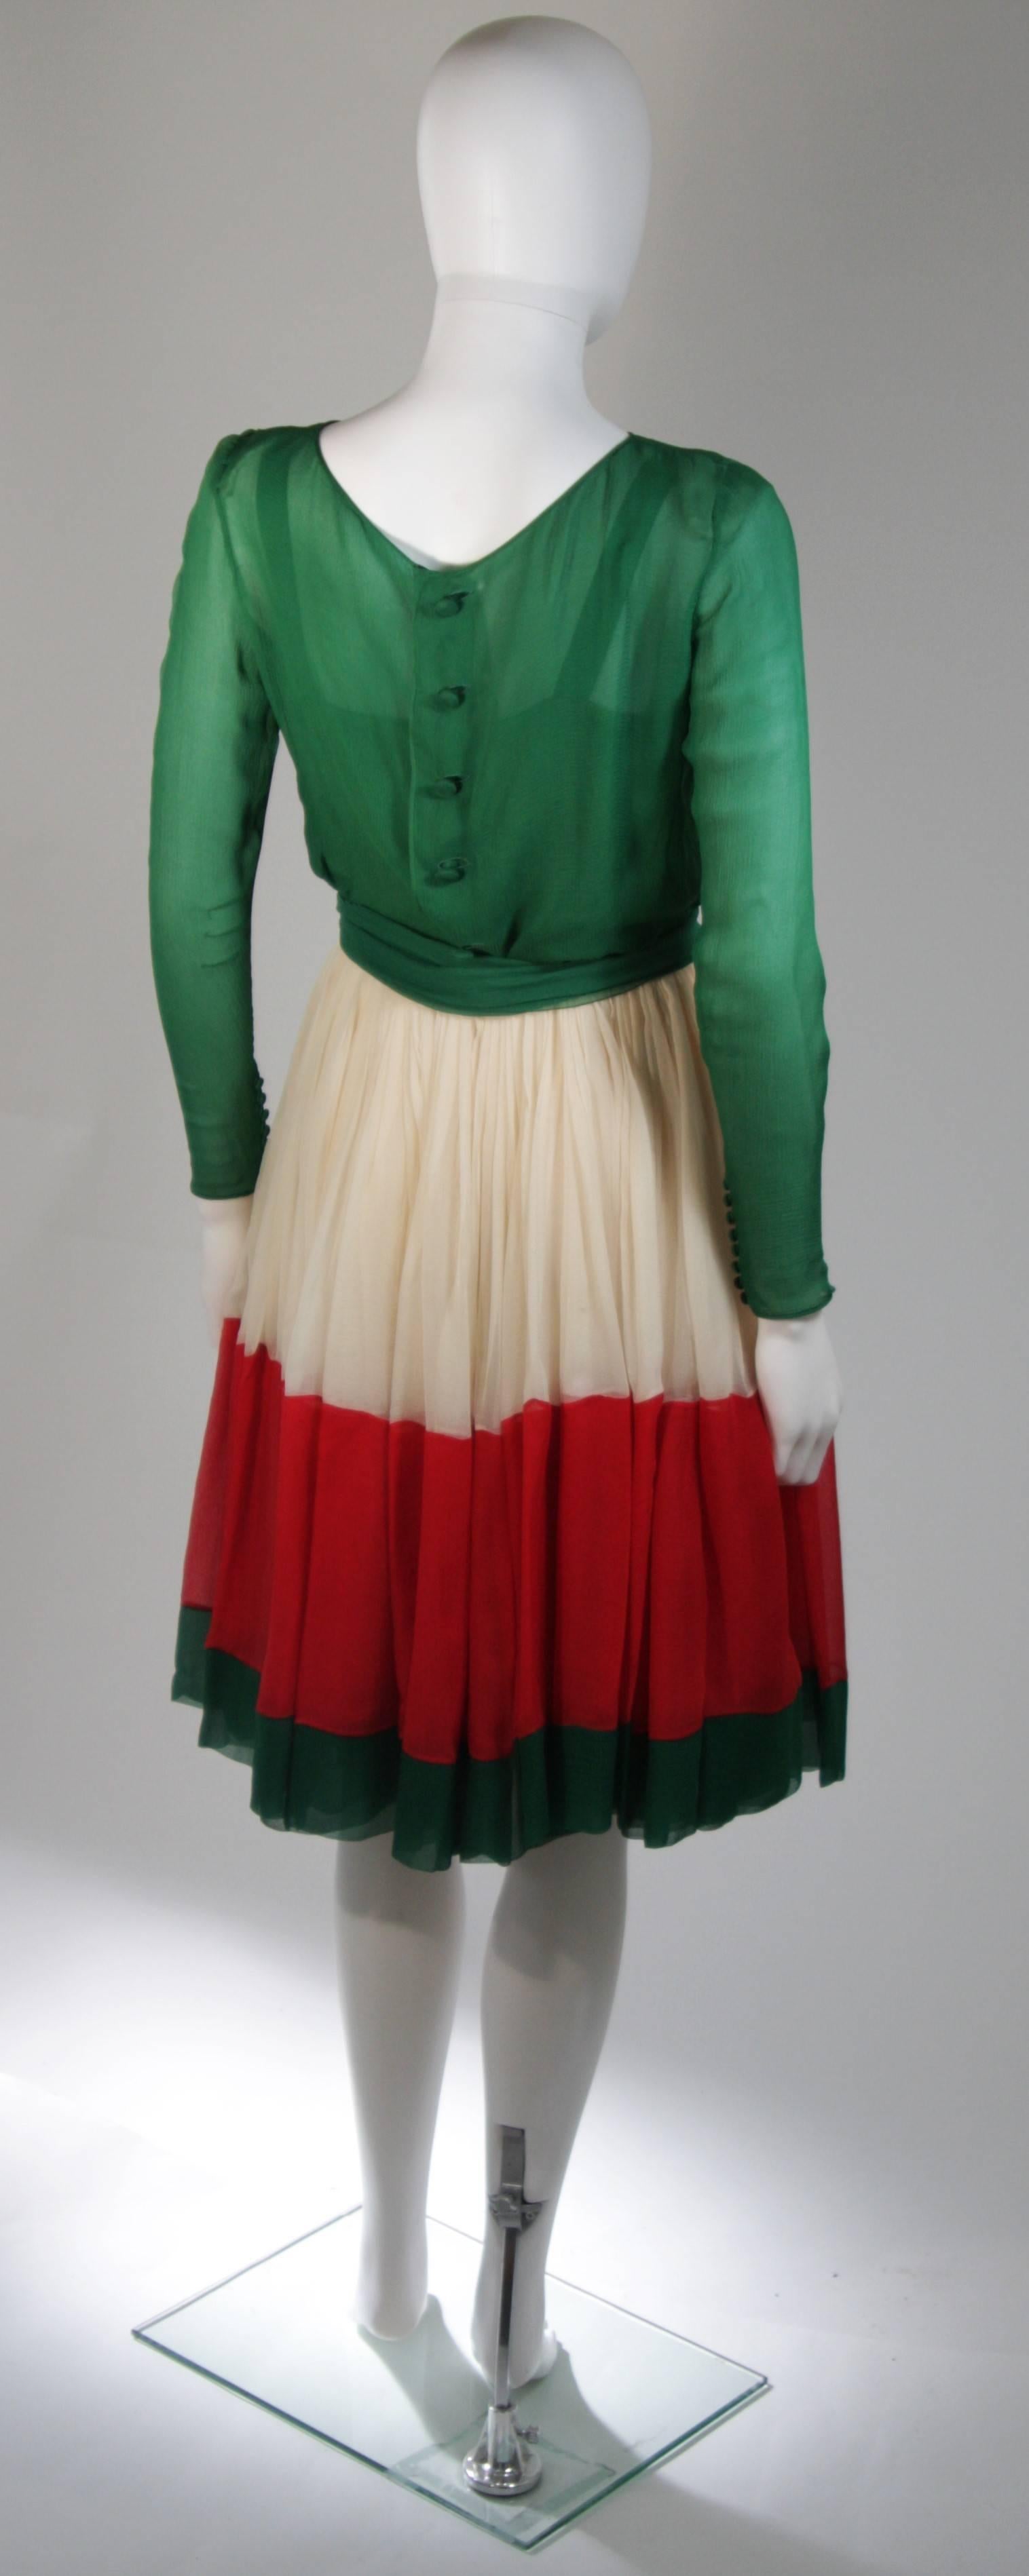 Galanos Attributed Silk Chiffon Green Red Cream Cocktail Dress Size Small Medium For Sale 2